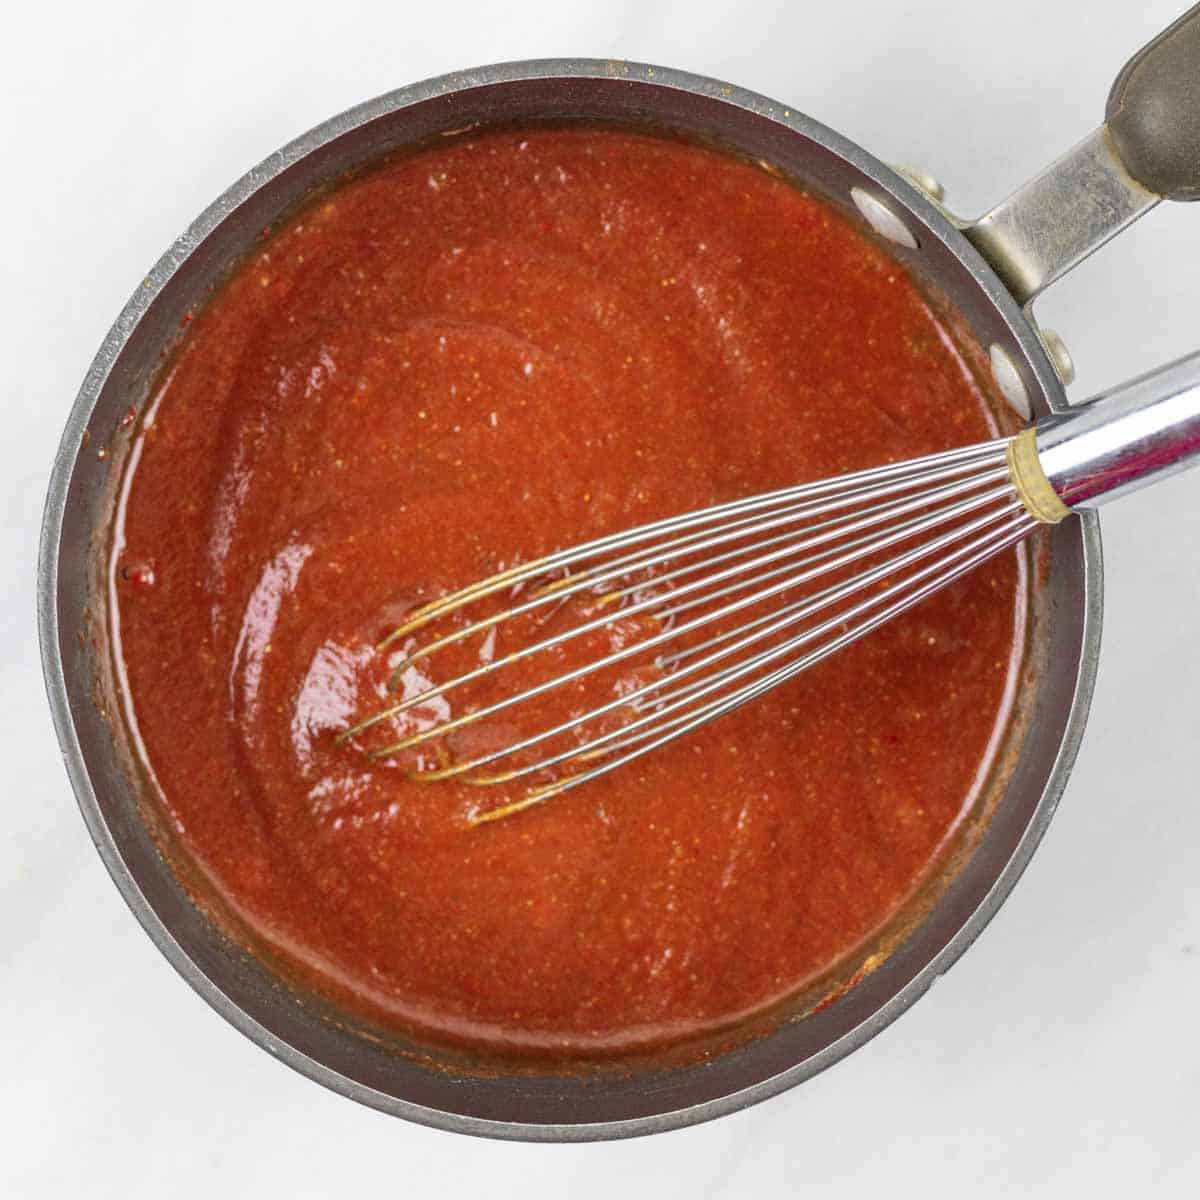 Whisked together bbq sauce ingredients in a pot with a whisk before simmering.